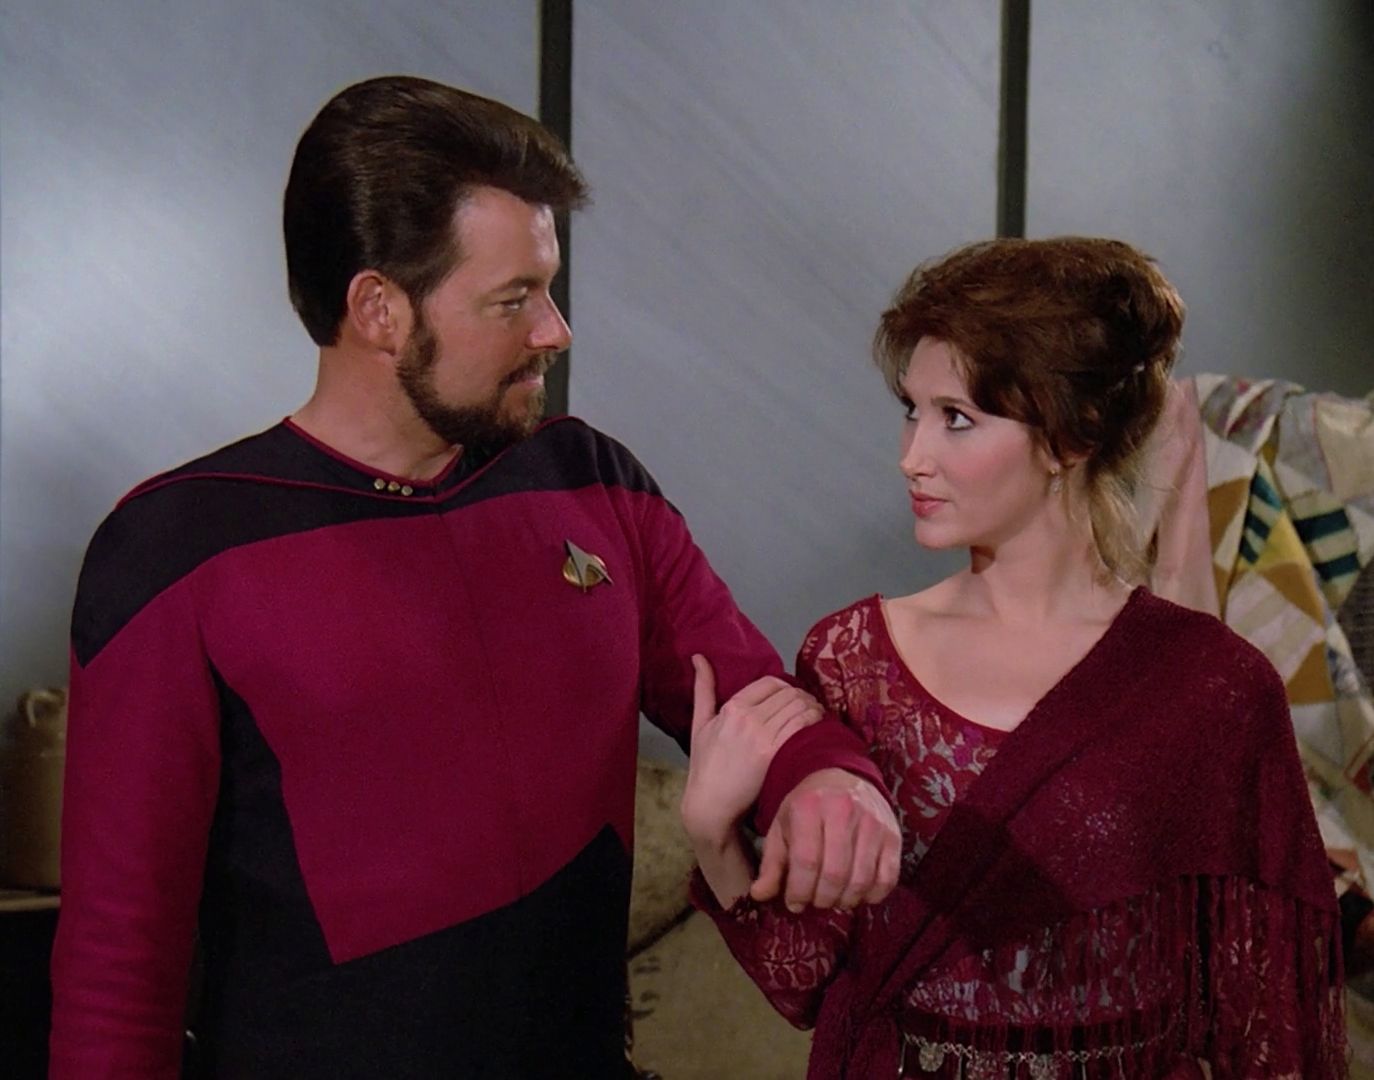 Star Trek The 10 Best Episodes Of TNG (And 10 Worst) Officially Ranked